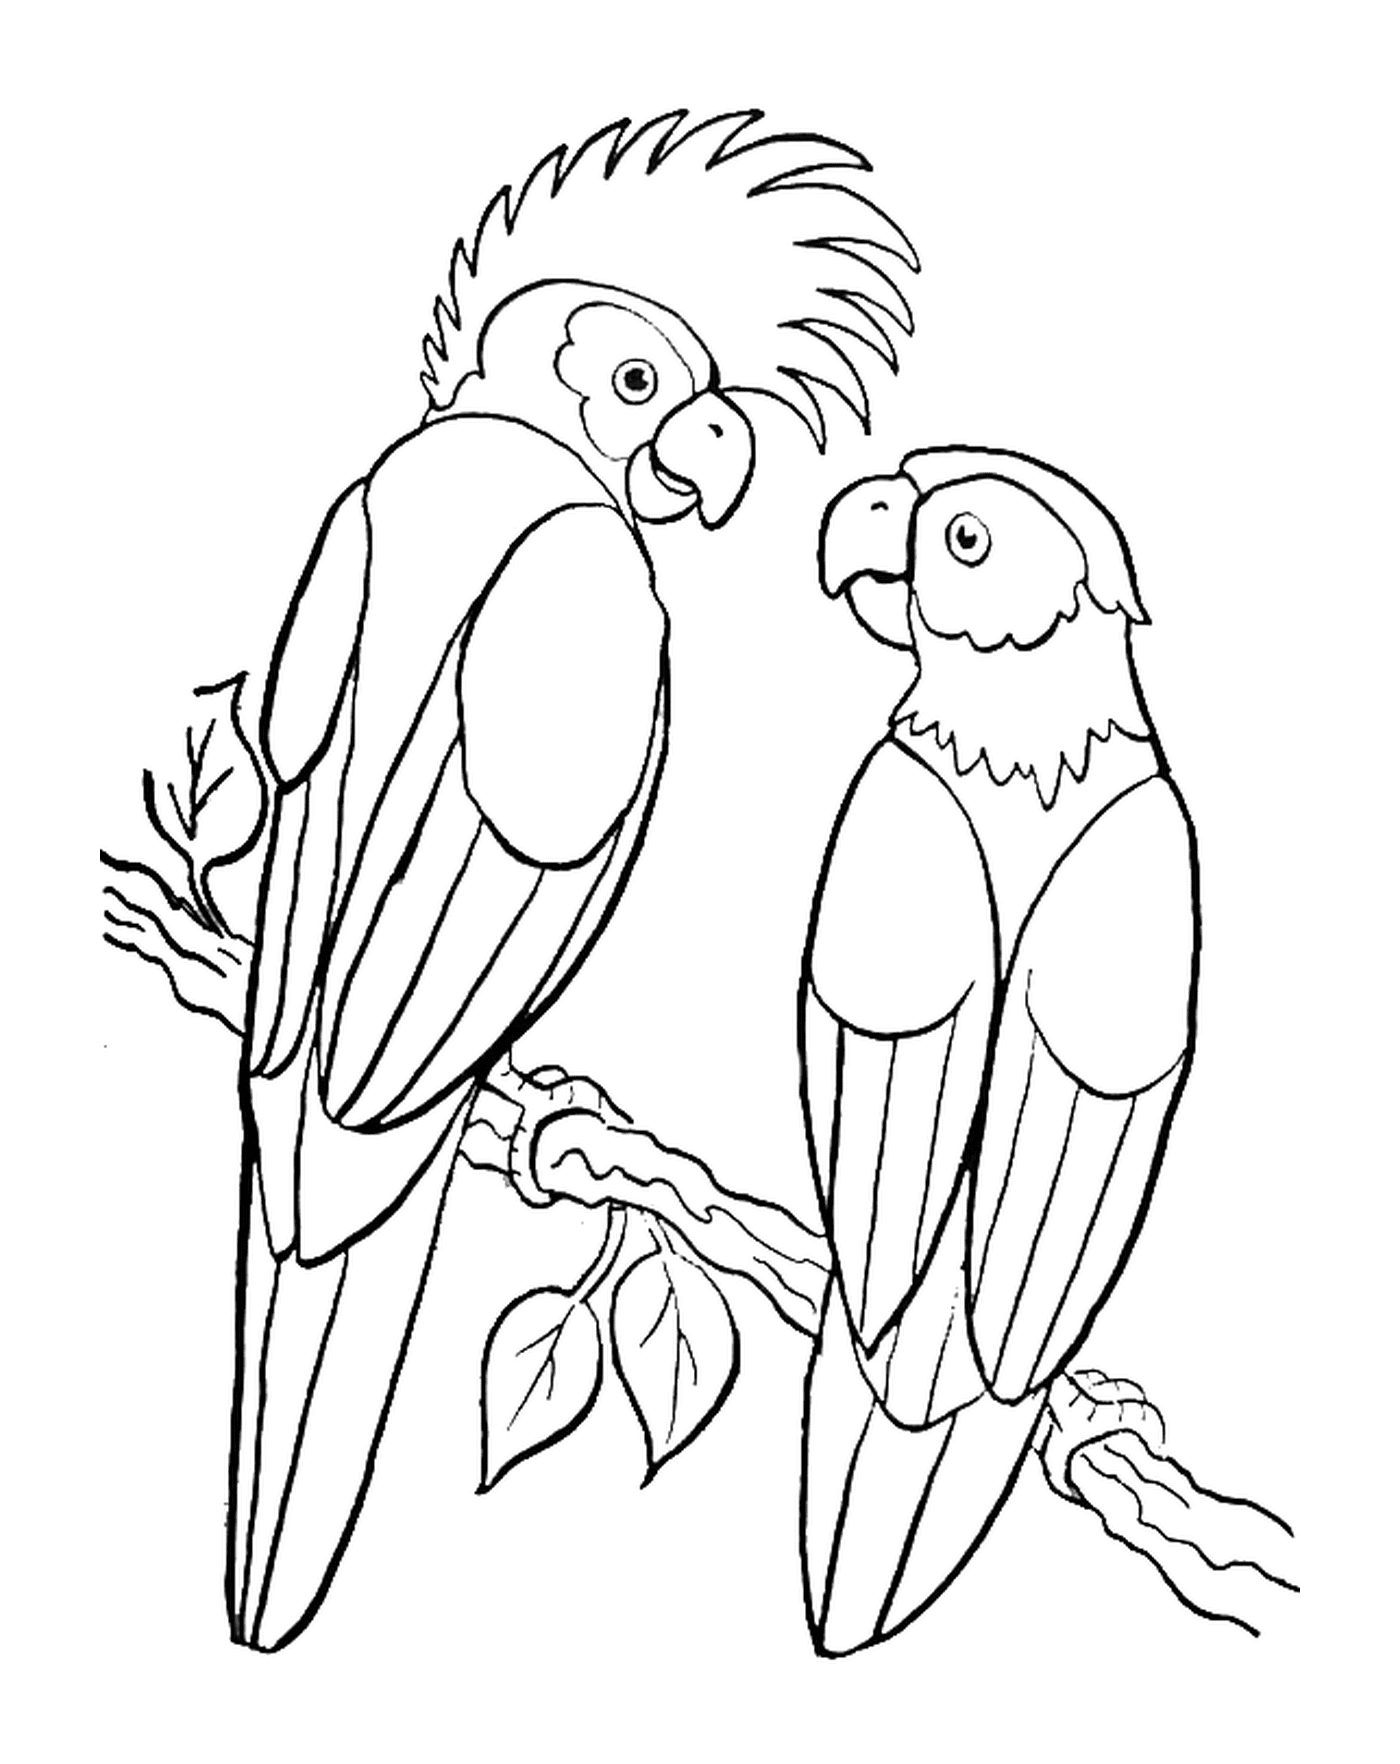  Couple of parrots on a tree branch 